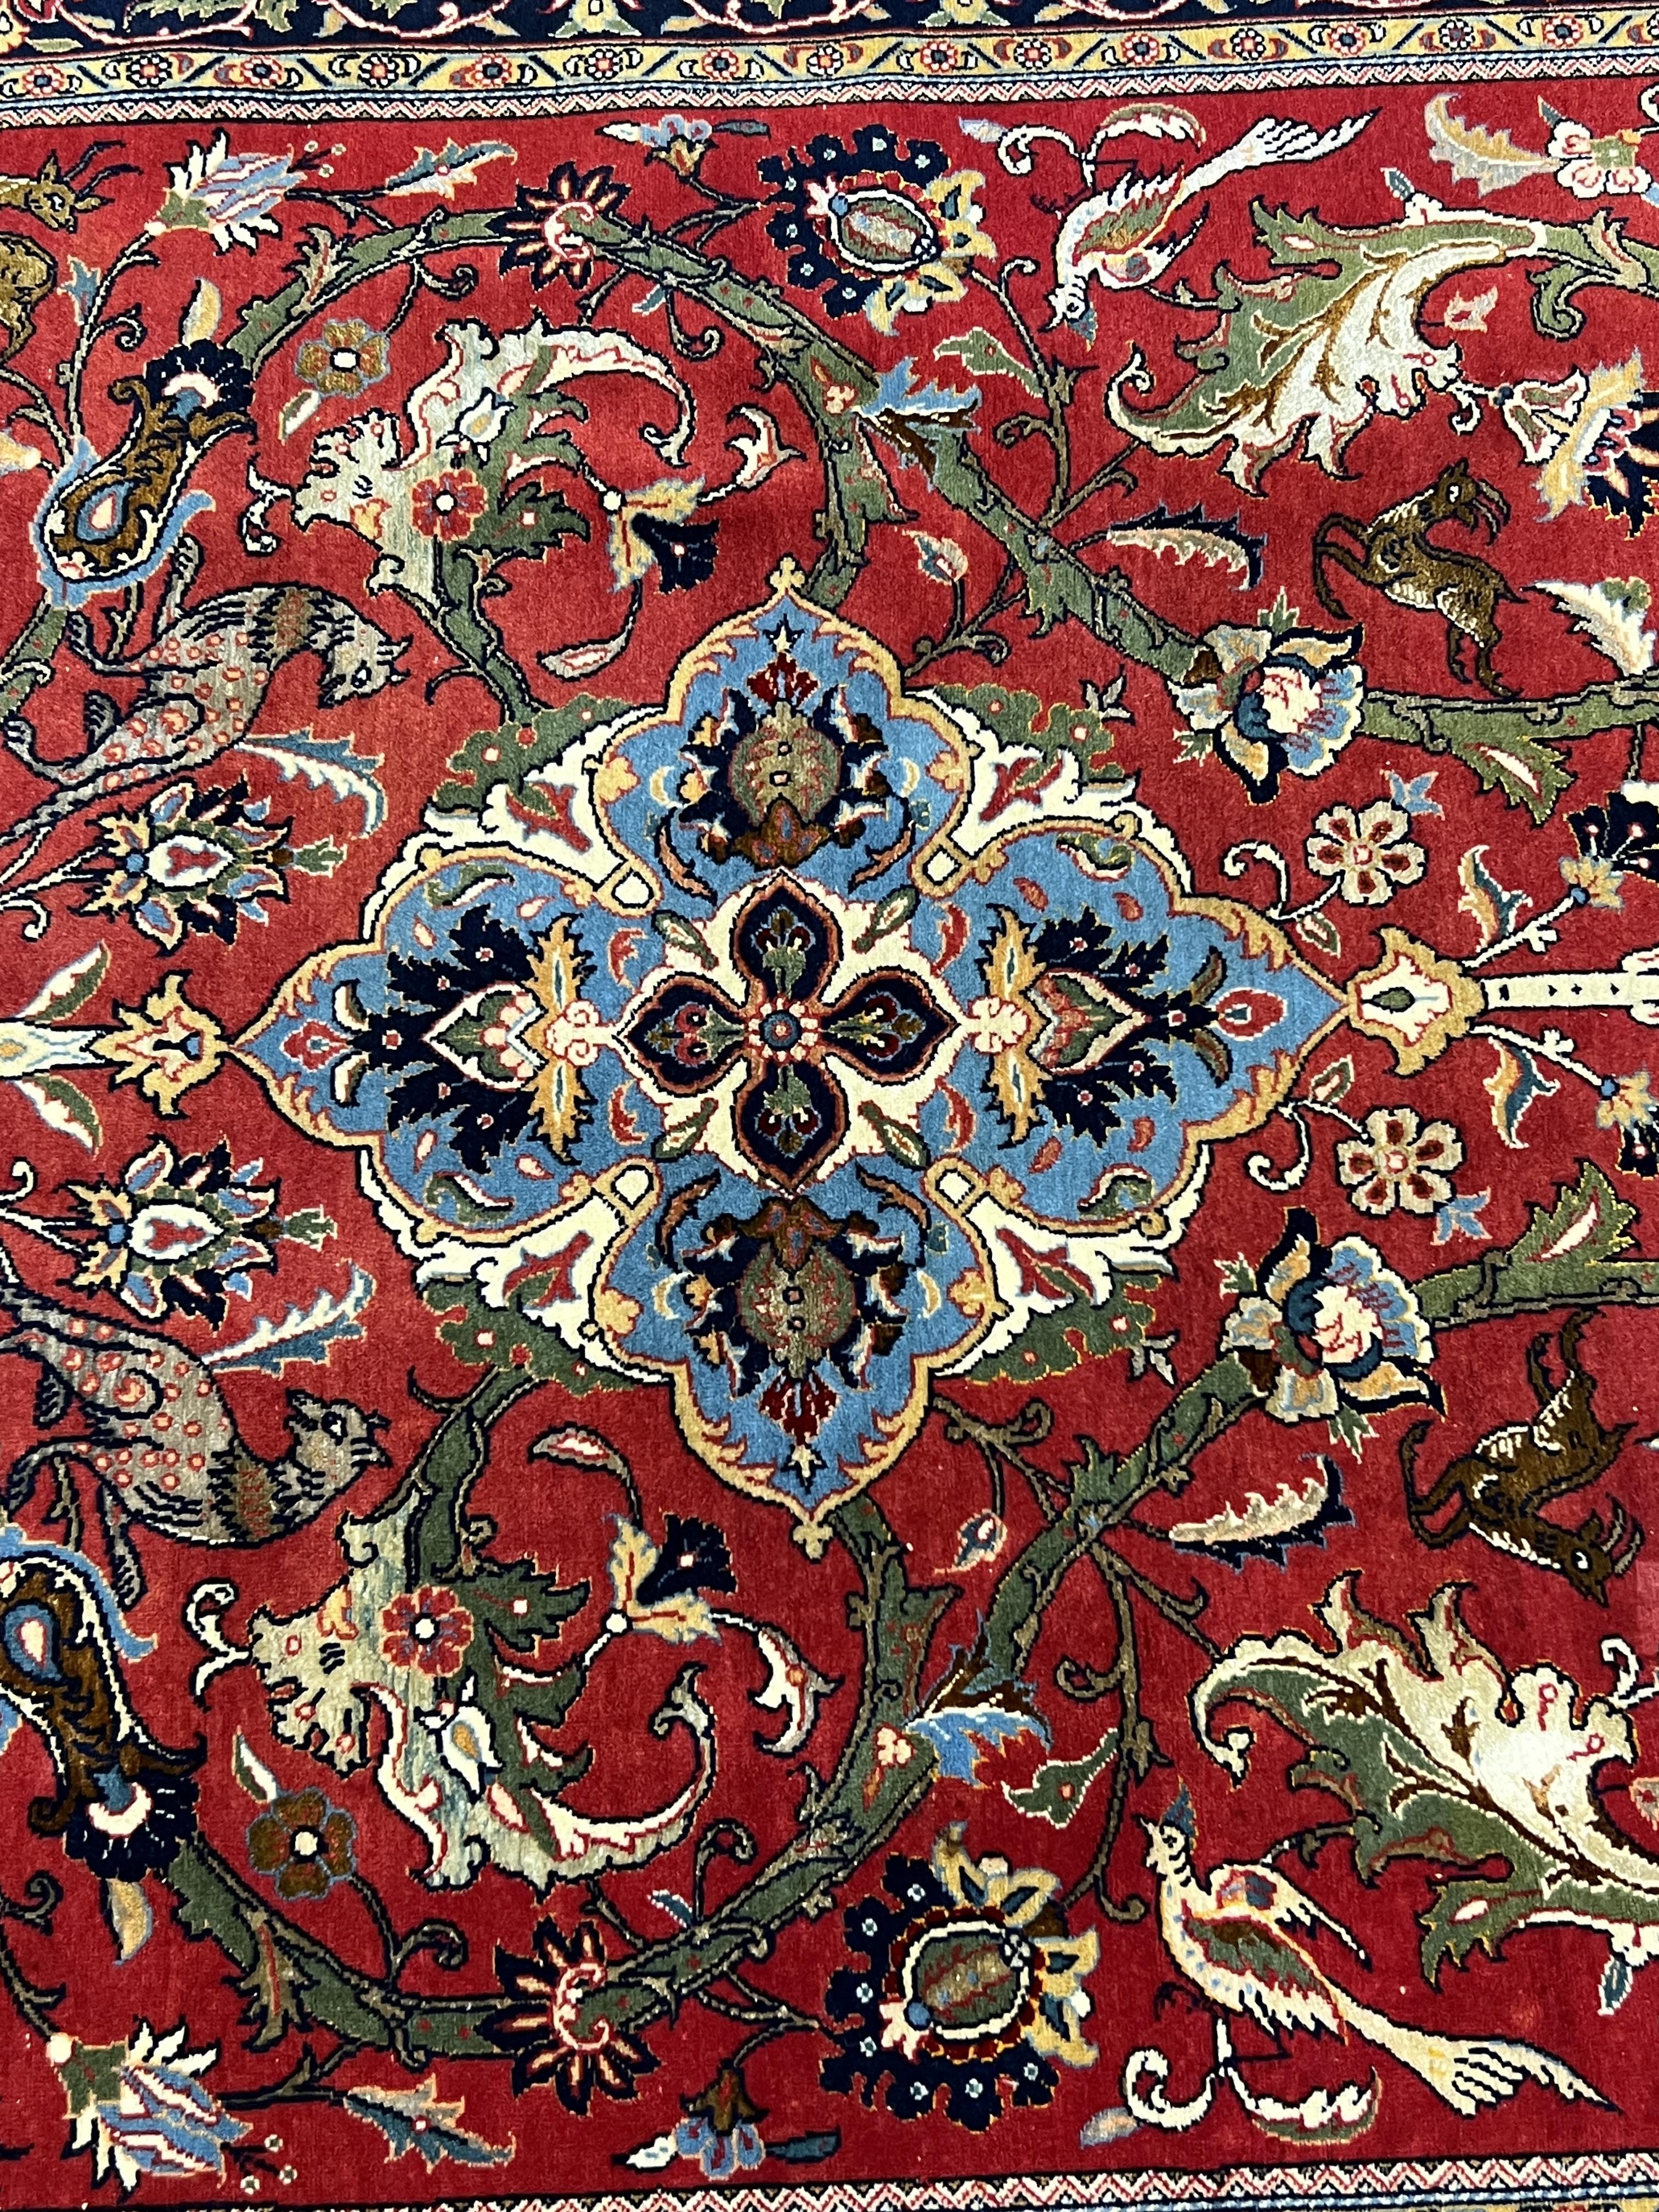 A Kashan red ground rug, woven with scrolling foliage and birds within a dark border, 216 x 138cm. Condition - good